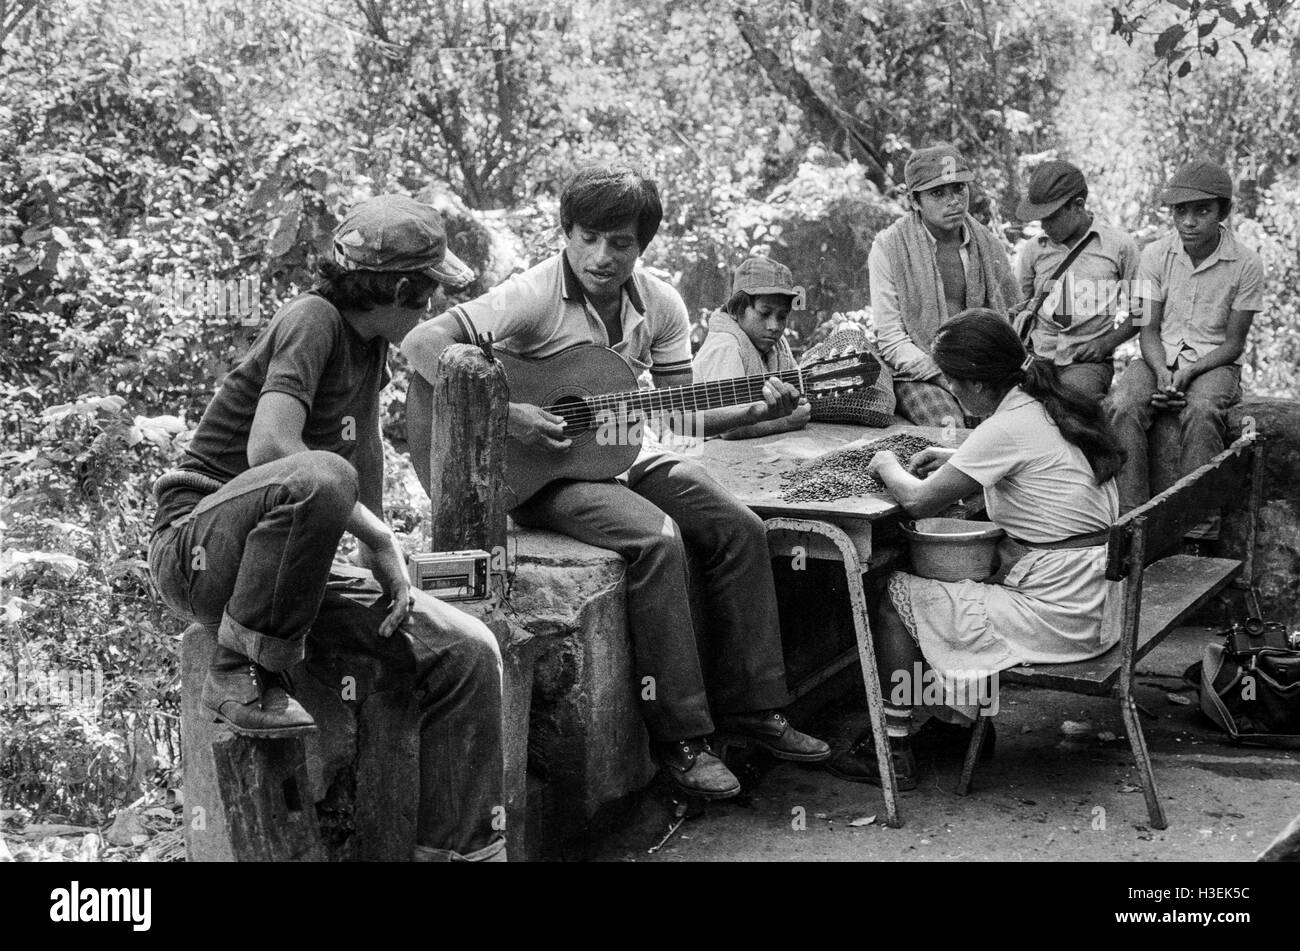 CHALATENANGO,  EL SALVADOR, FEB 1984: - Within the FPL Guerrilla's Zones of Control   Teenagers and young boys who ferry supplies across lake Cuscatlan at night listen to some guitar music. Stock Photo